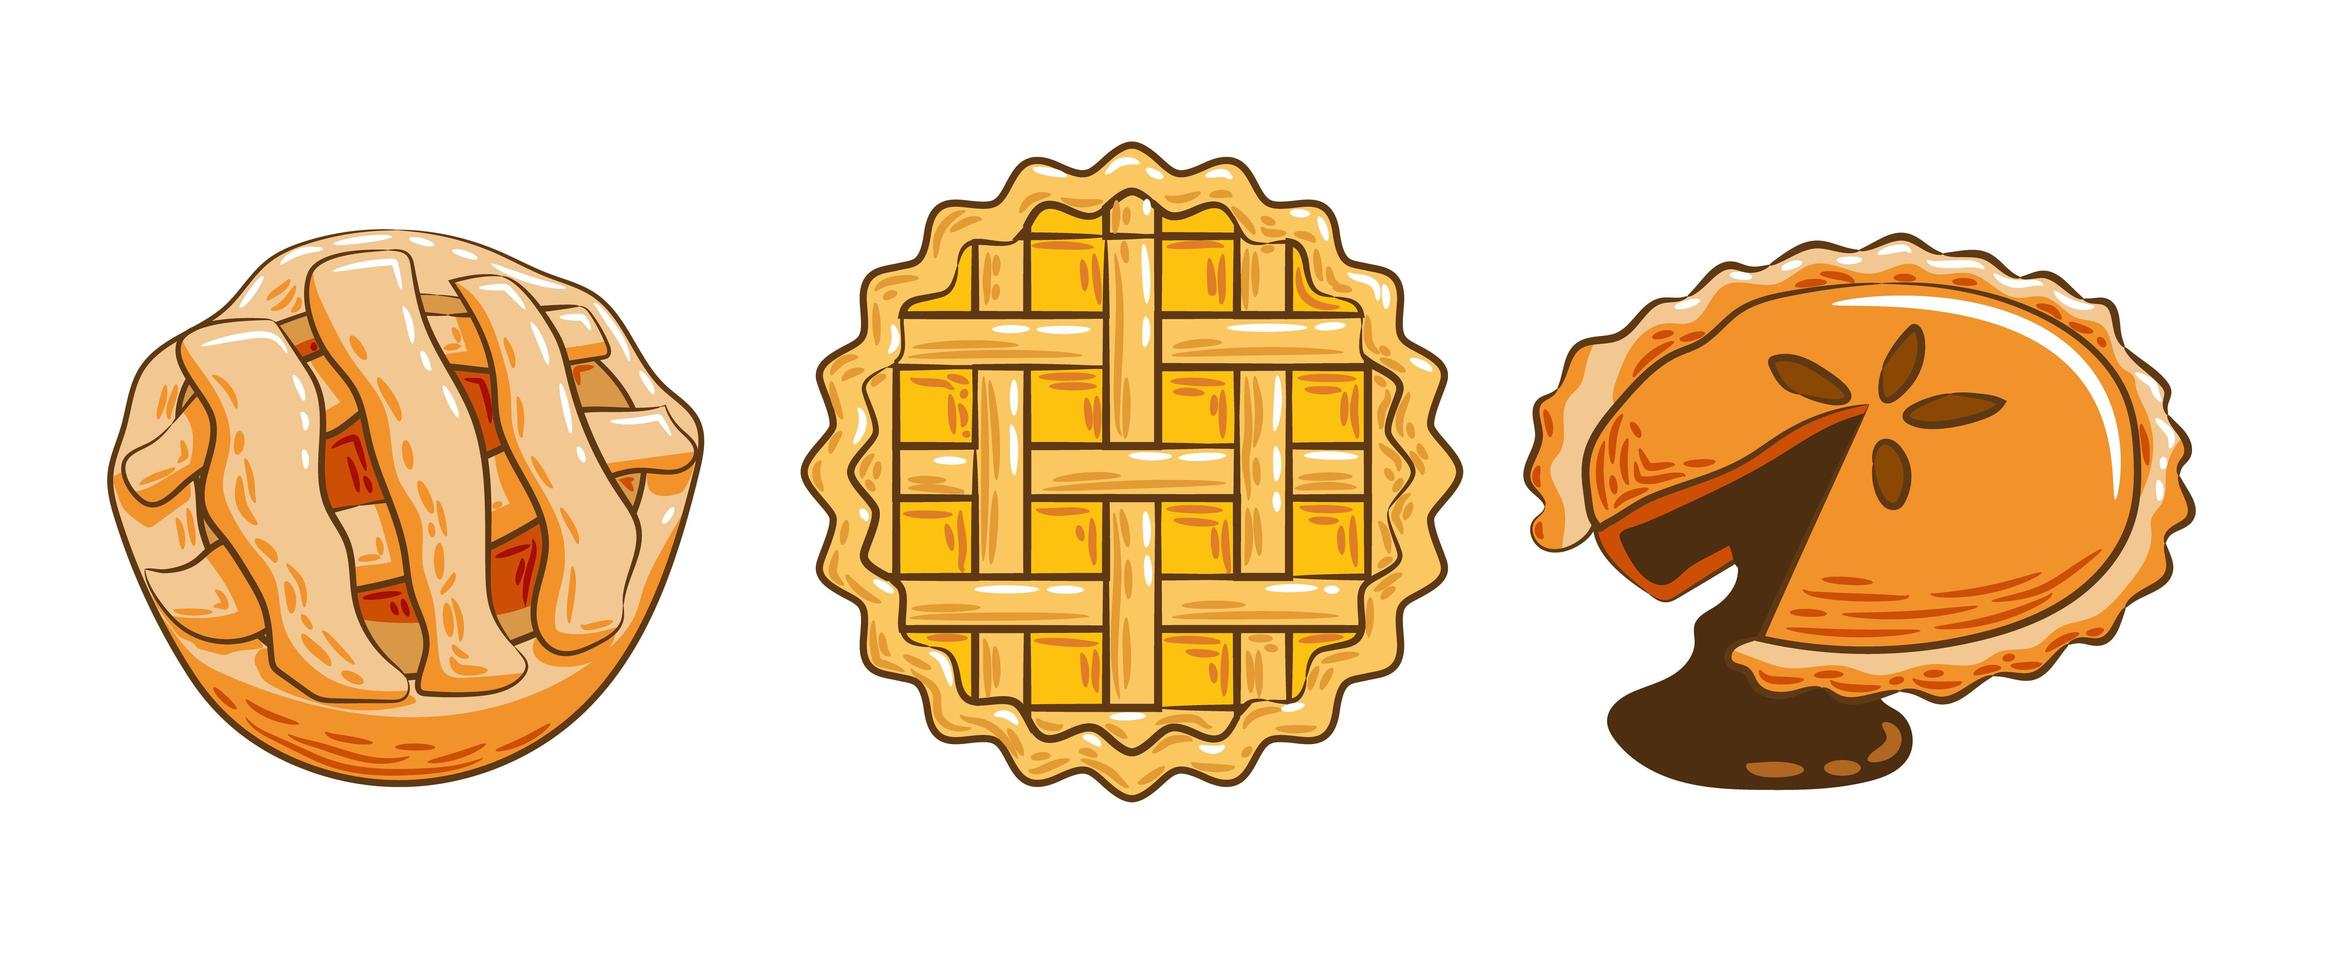 Various Types of Full Pies Set vector